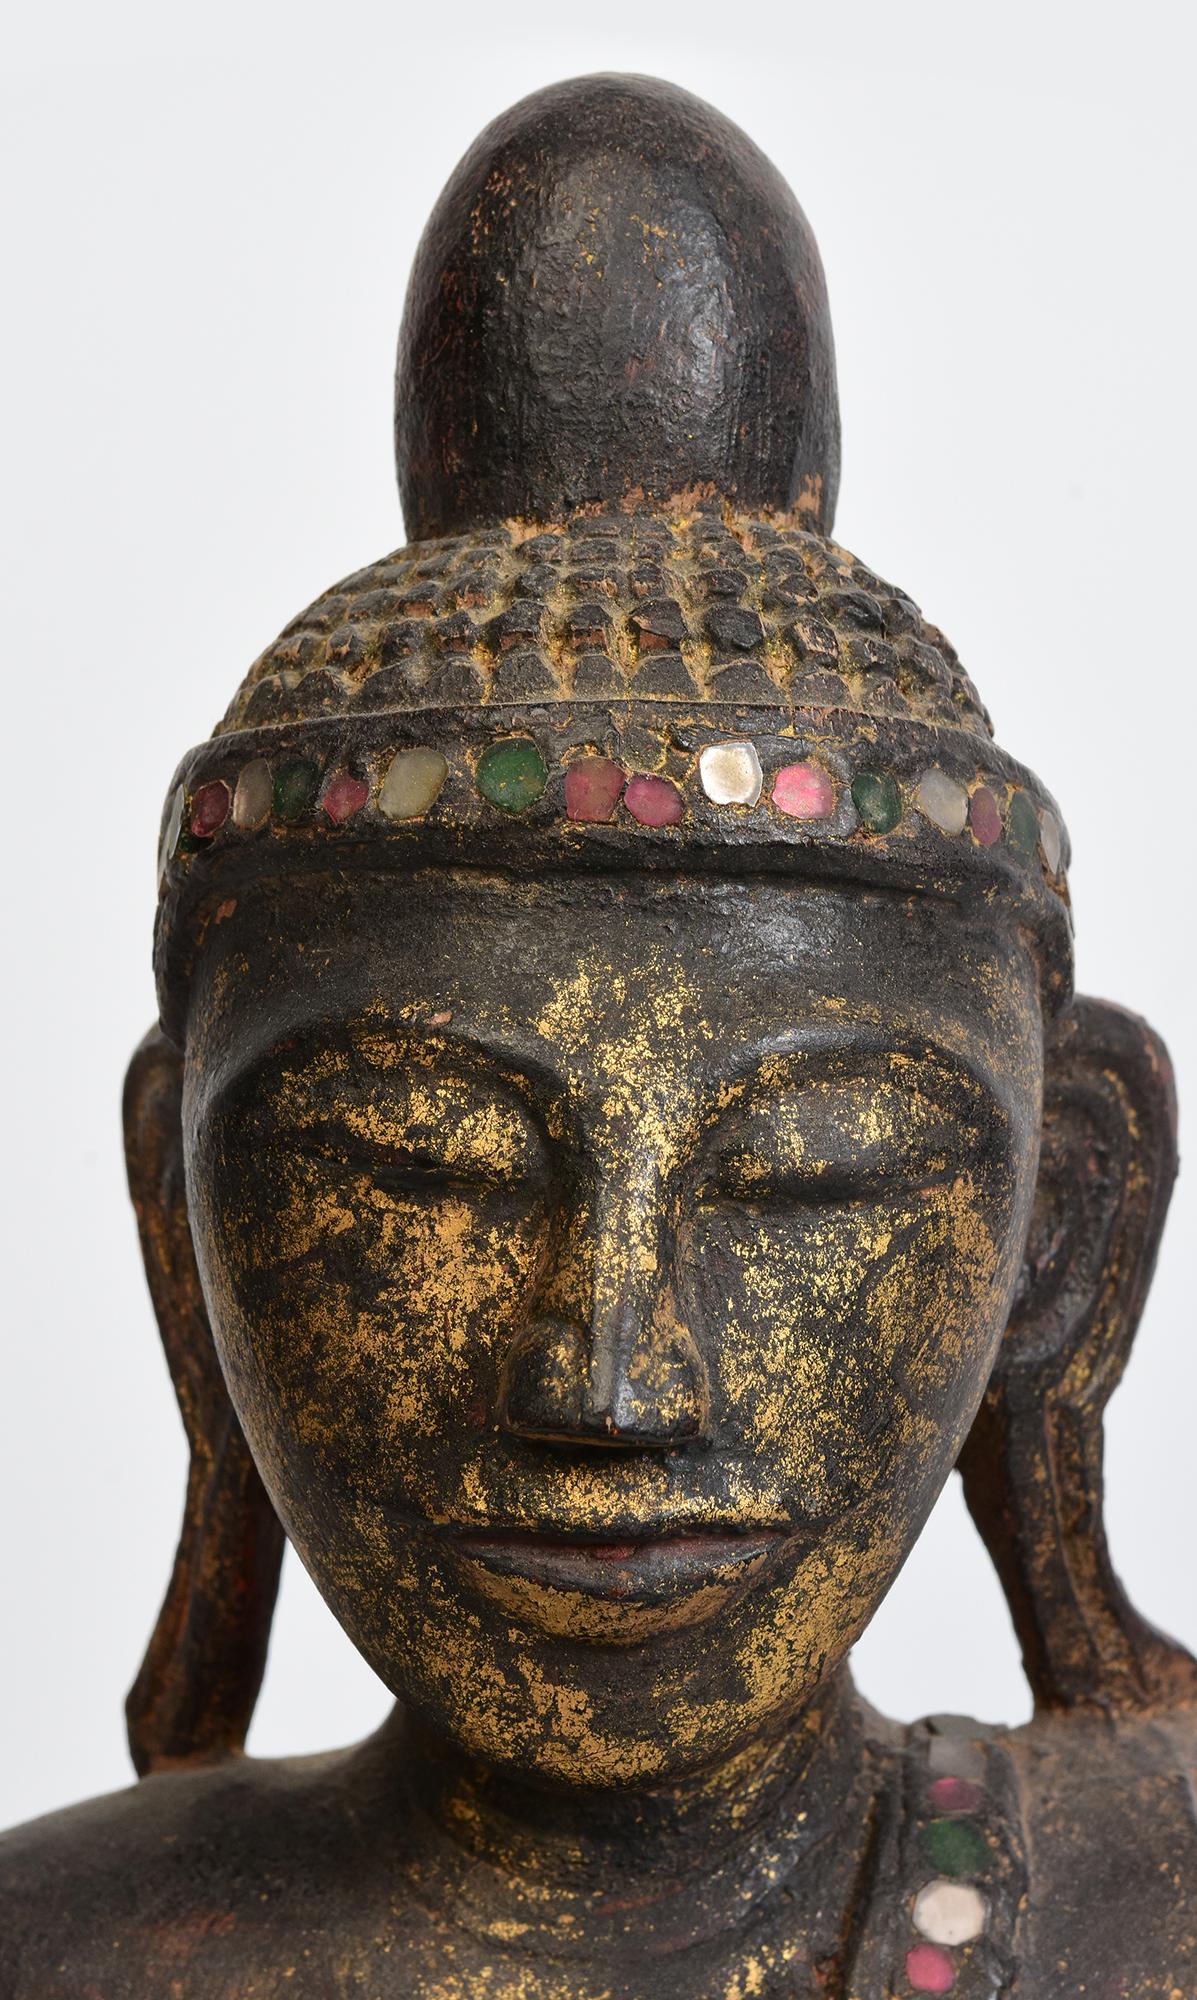 Antique Burmese wooden Buddha sitting in Mara Vijaya (calling the earth to witness) posture on a base.

Age: Burma, Shan Period, 18th Century
Size: Height 52 C.M. / Width 23.8 C.M. / Depth 14.5 C.M.
Condition: Nice condition overall (some expected